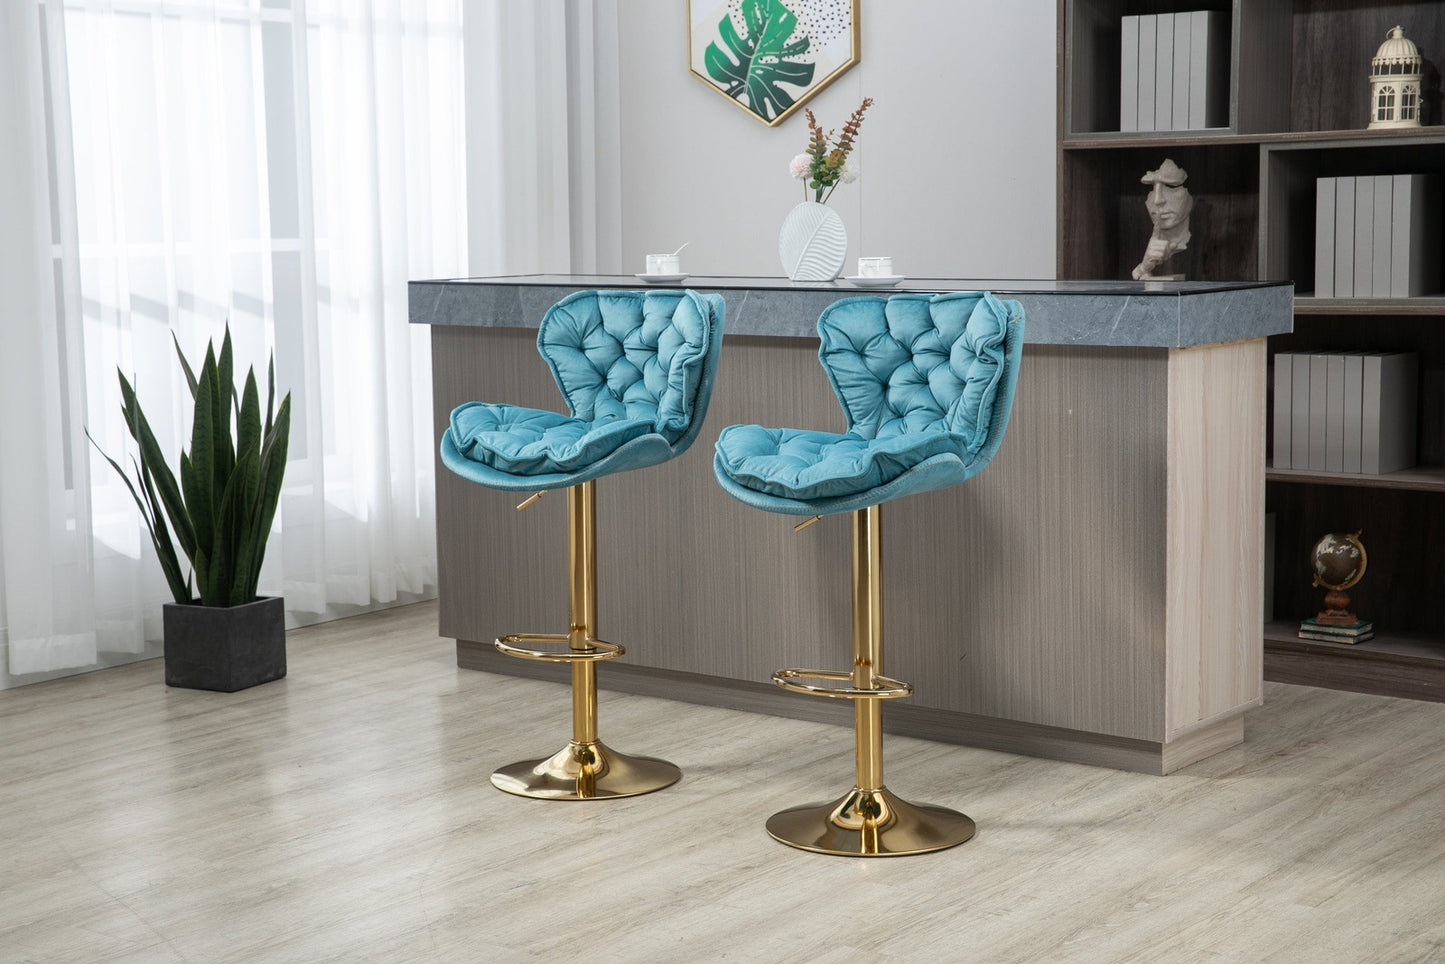 COOLMORE Bar Stools with Back and Footrest Counter Height Dining Chairs Set of 2